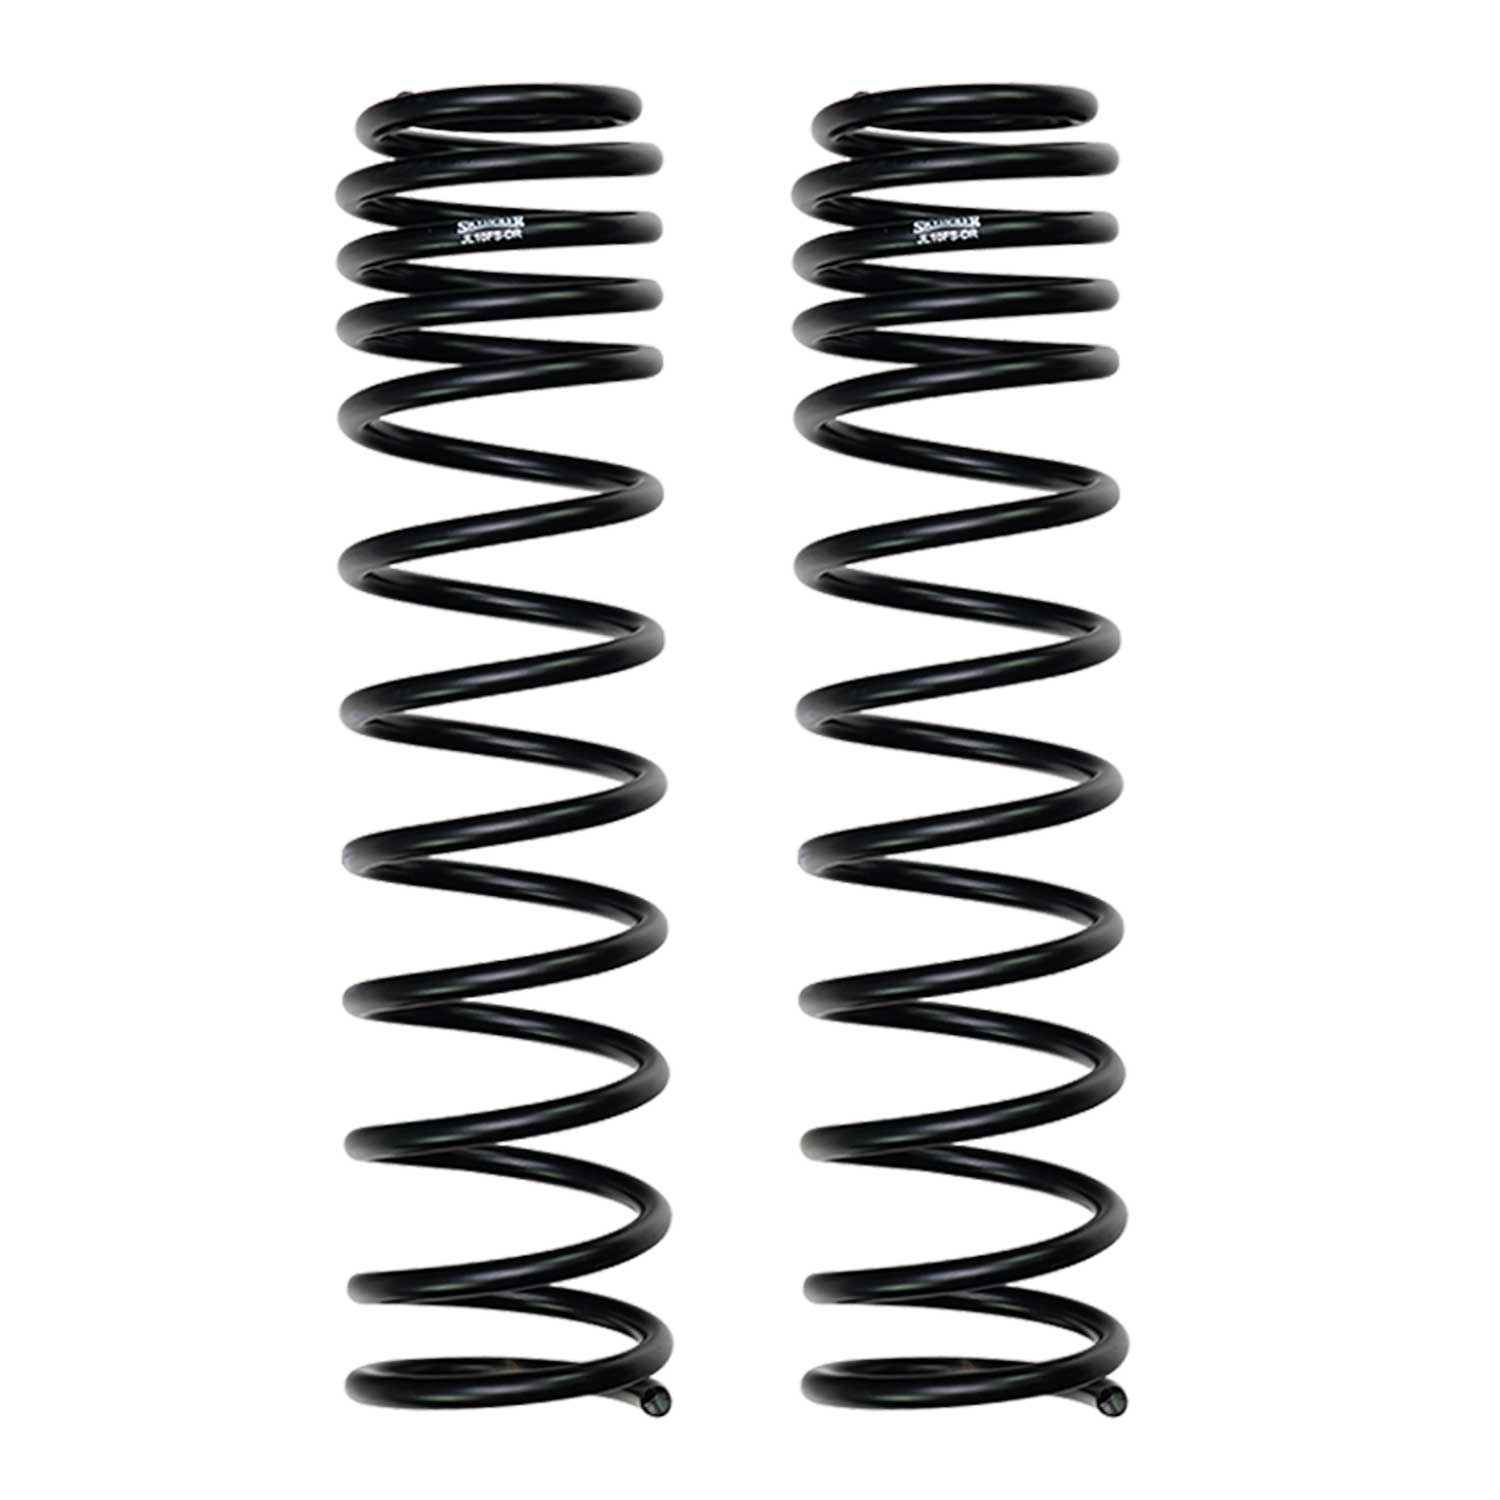 Dual-Rate Long-Travel Rear Coil Springs for Jeep Gladiator